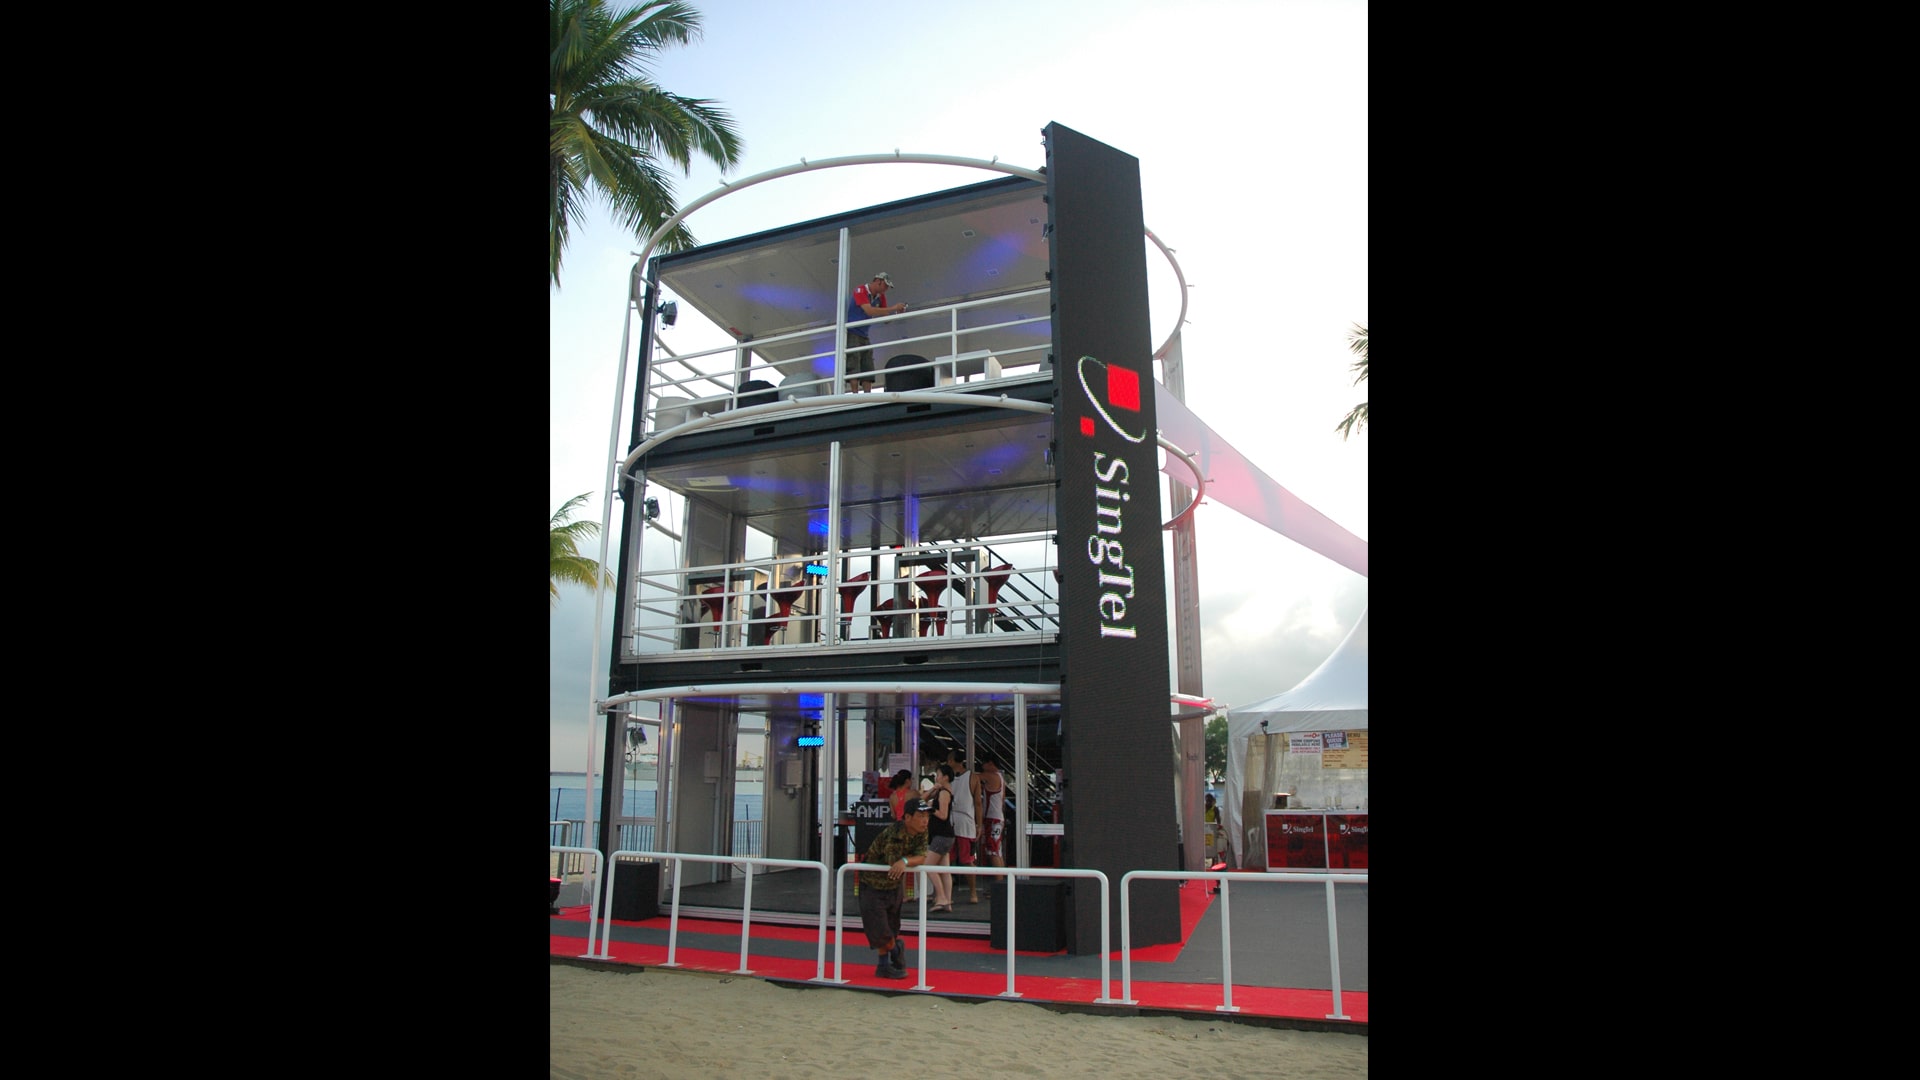 tsc_opt-images_customized-containers_zoukout-singtel-lounge-area-1920x1080-03-min